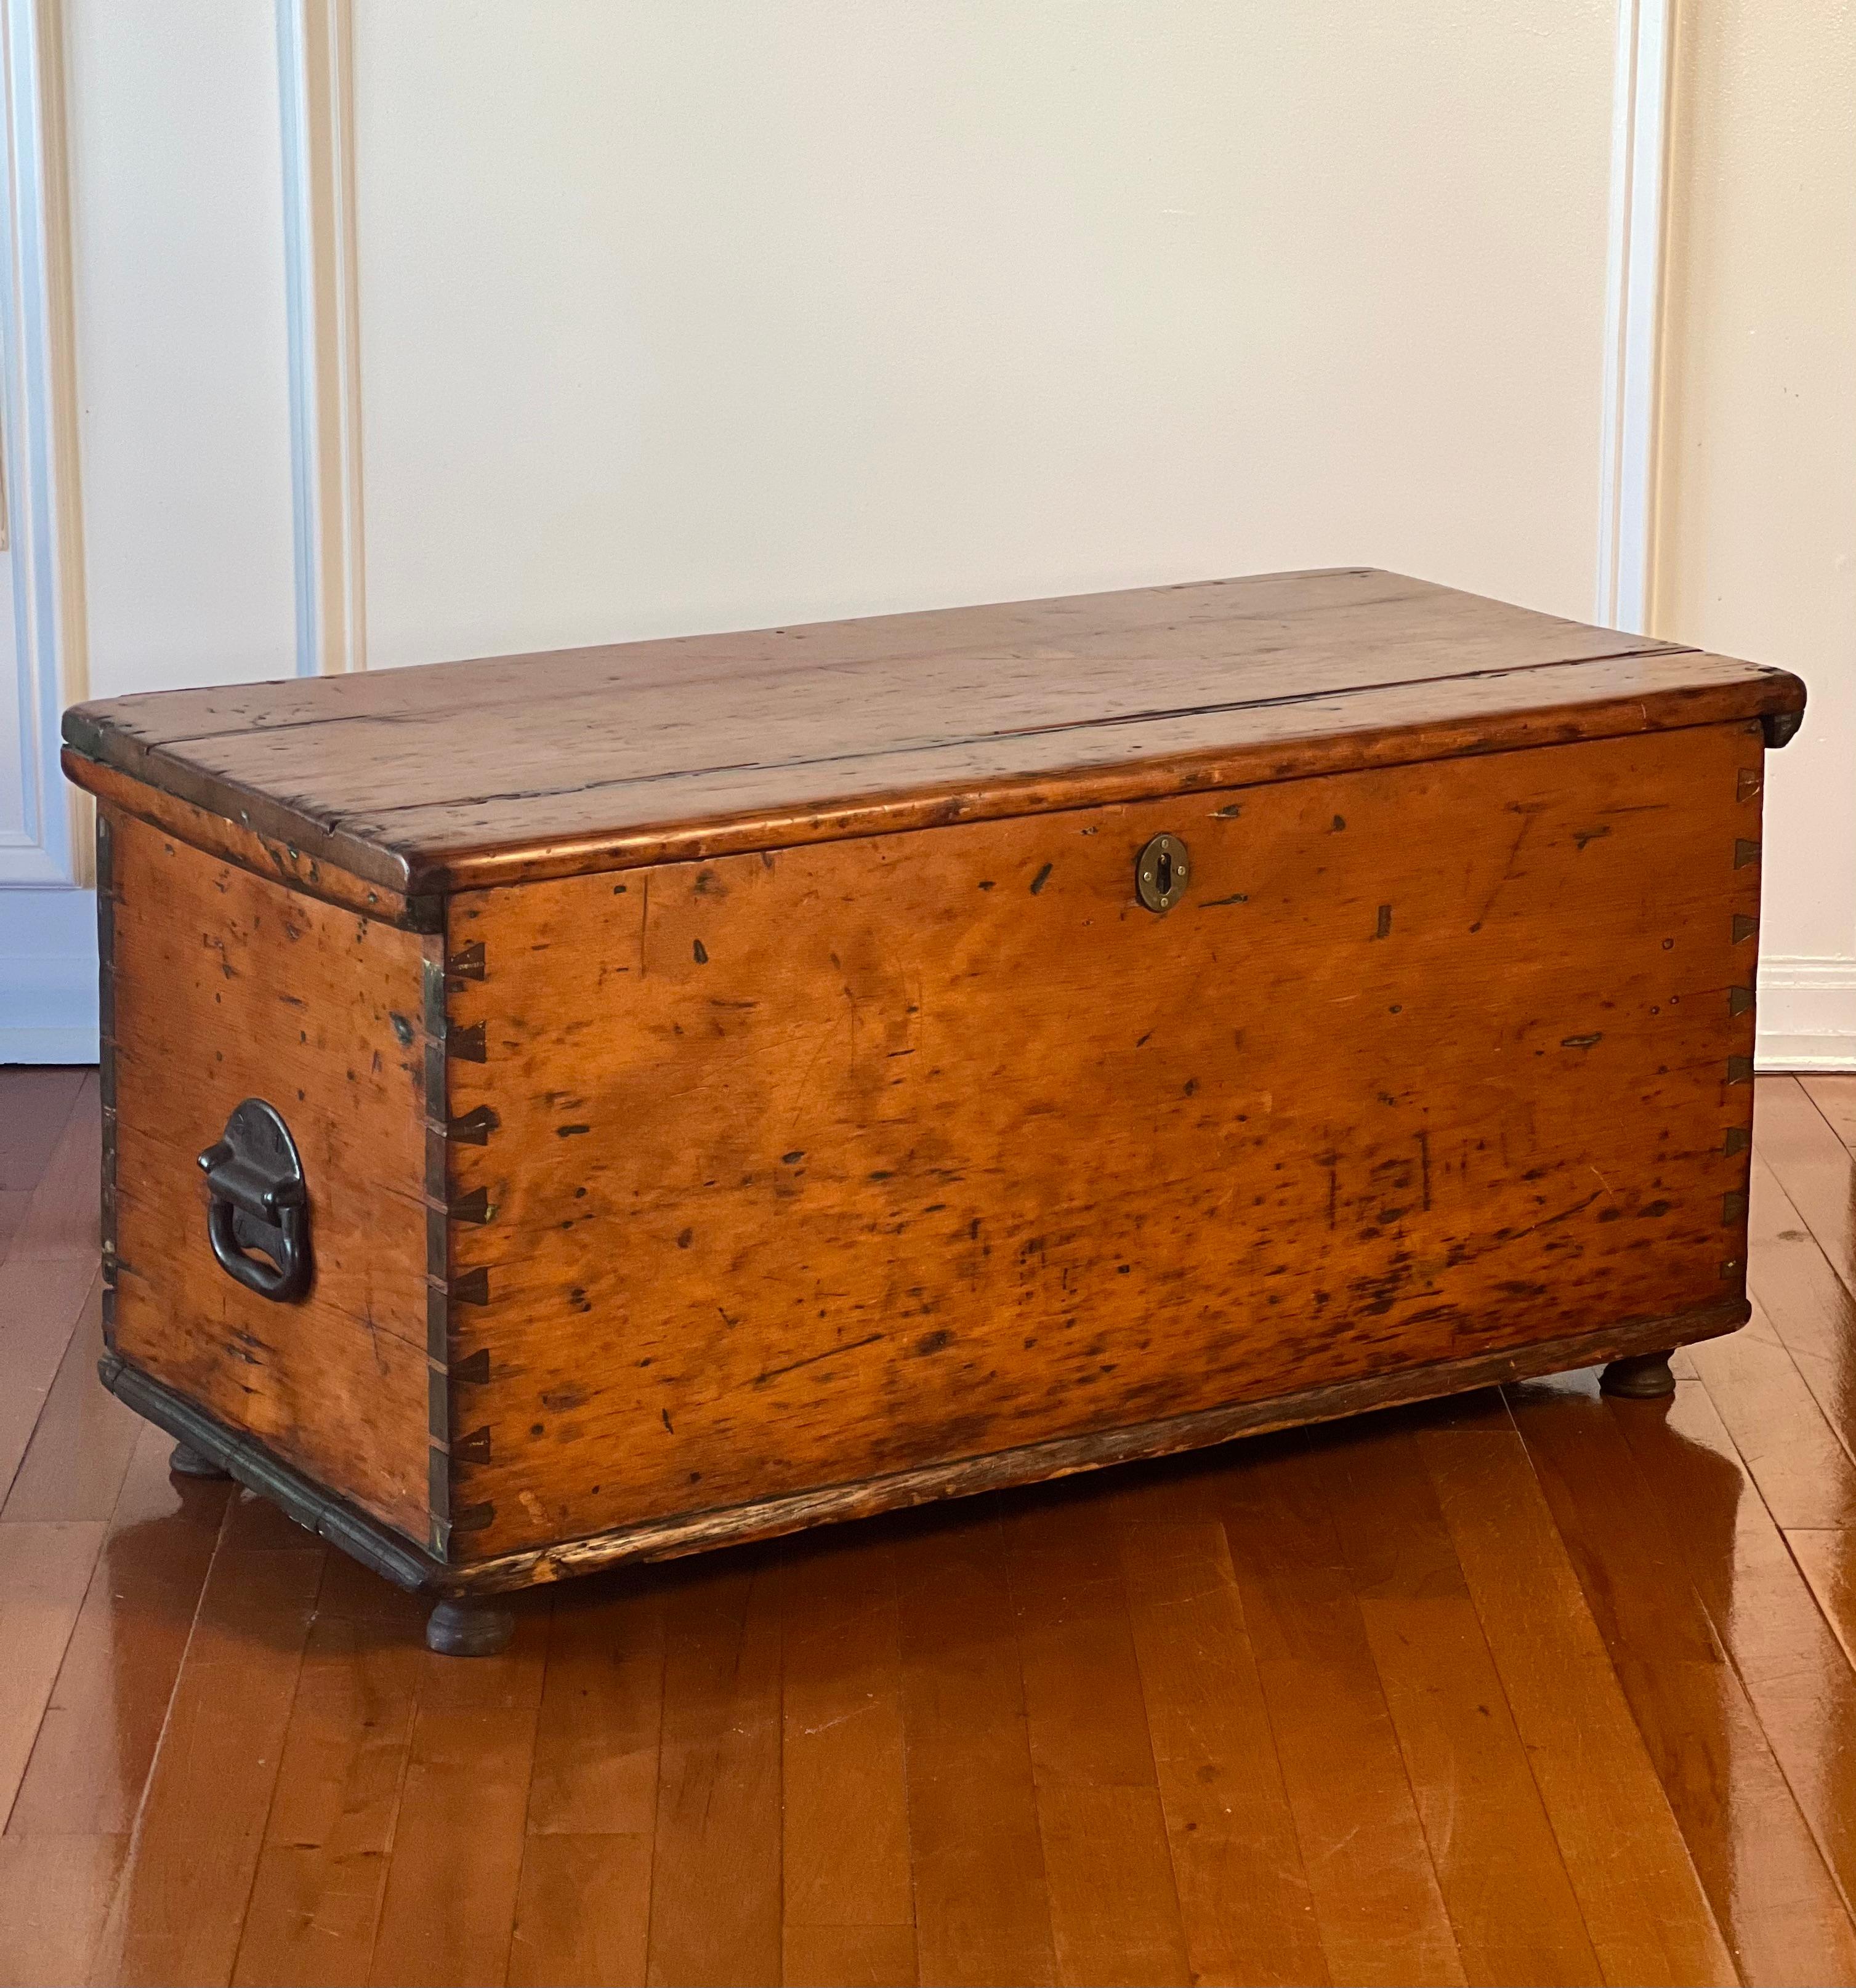 Primitive dovetailed pine chest or coffer, Europe, late 18th century.

Likely Austrian or German, this rustic European, hand-crafted chest is loaded with character and has a wonderful, weathered patina with a time-worn glow. It has dovetail